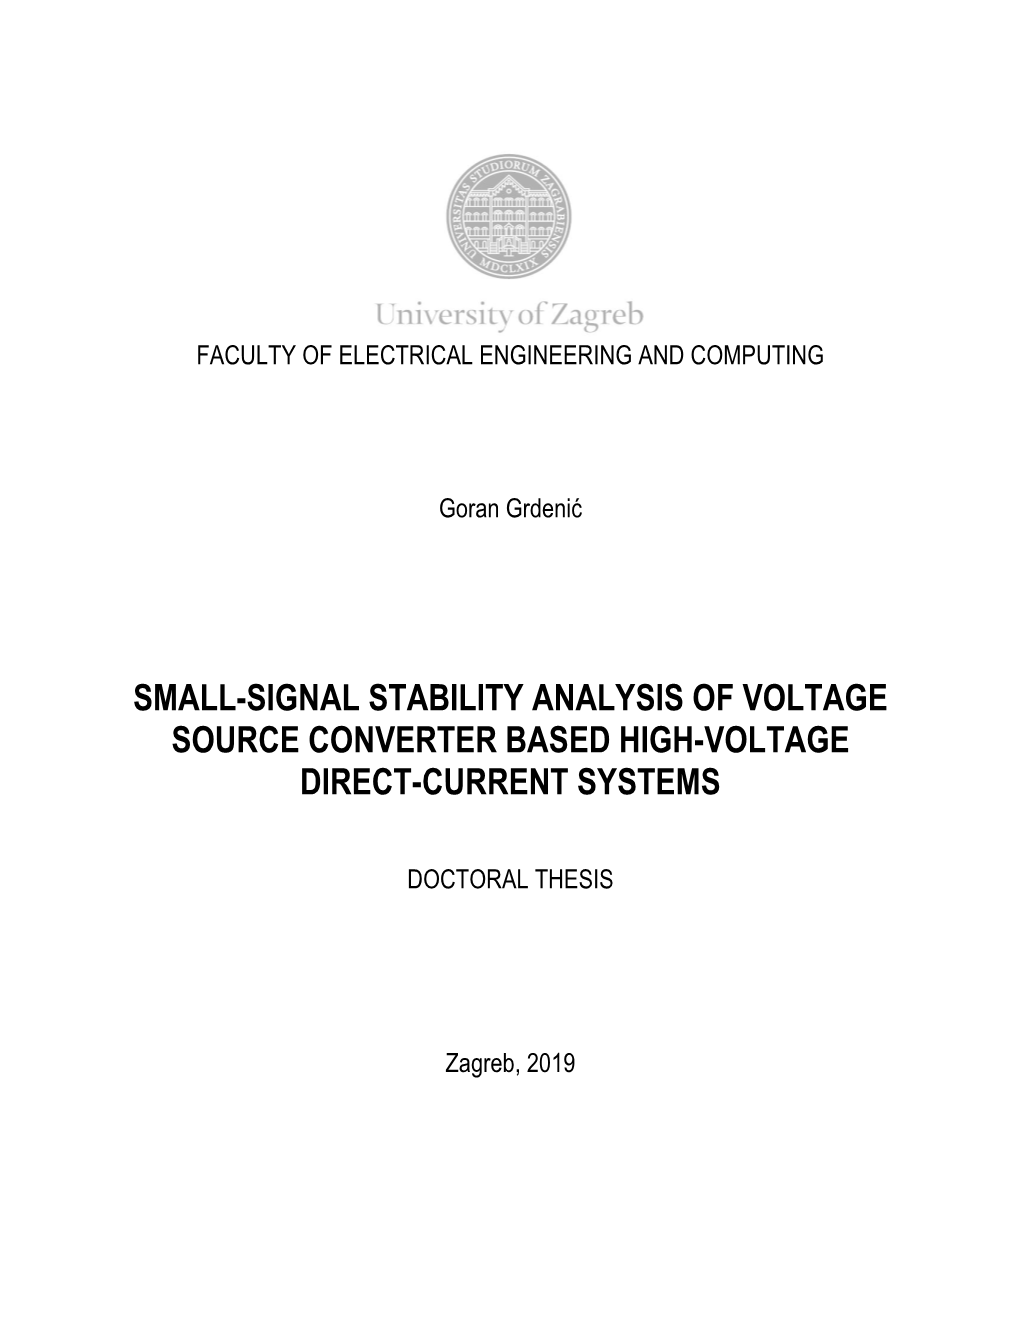 Small-Signal Stability Analysis of Voltage Source Converter Based High-Voltage Direct-Current Systems